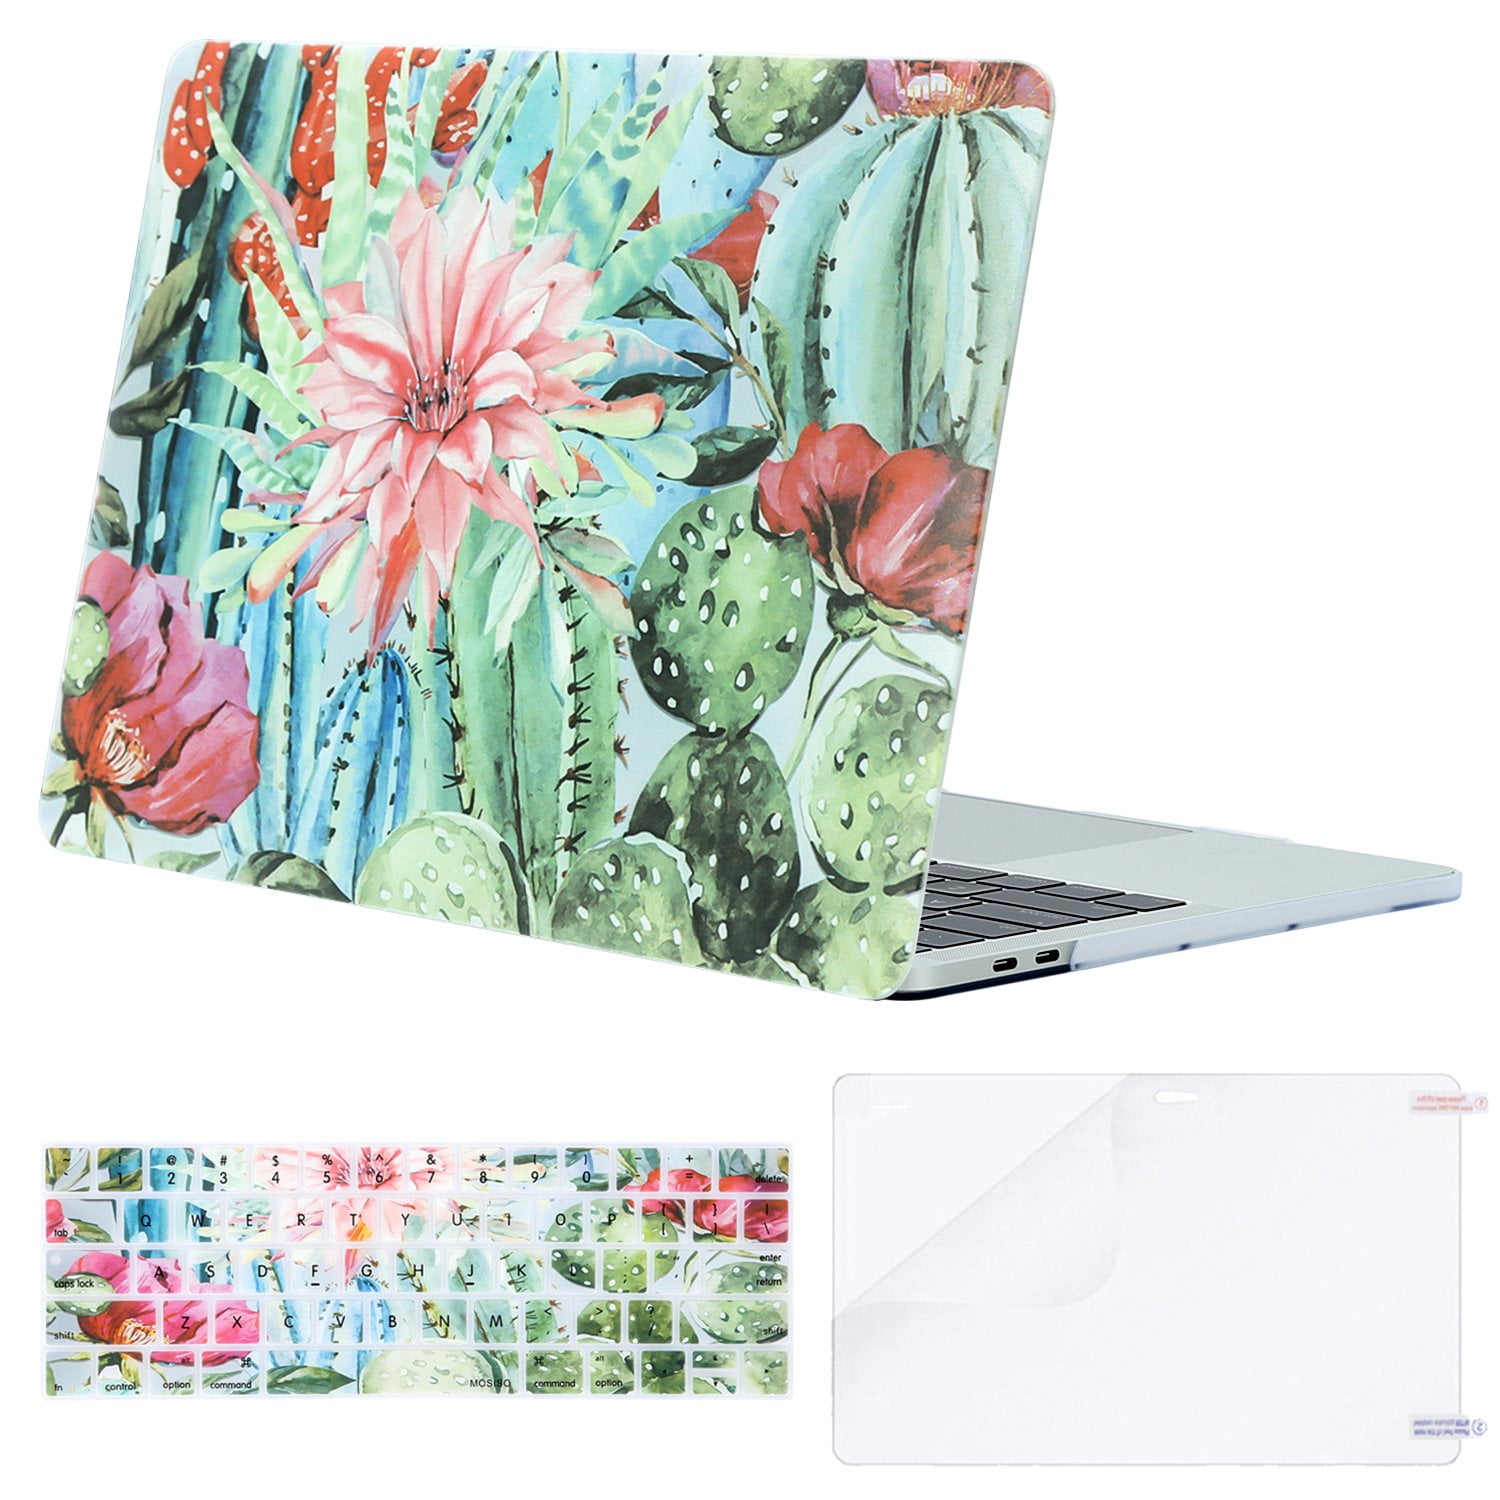 MacBook Pro 2017 Cover Art Cartoon Drawing Tropical Leaf Plastic Hard Shell Compatible Mac Air 11 Pro 13 15 13inch MacBook Pro Case Protection for MacBook 2016-2019 Version 